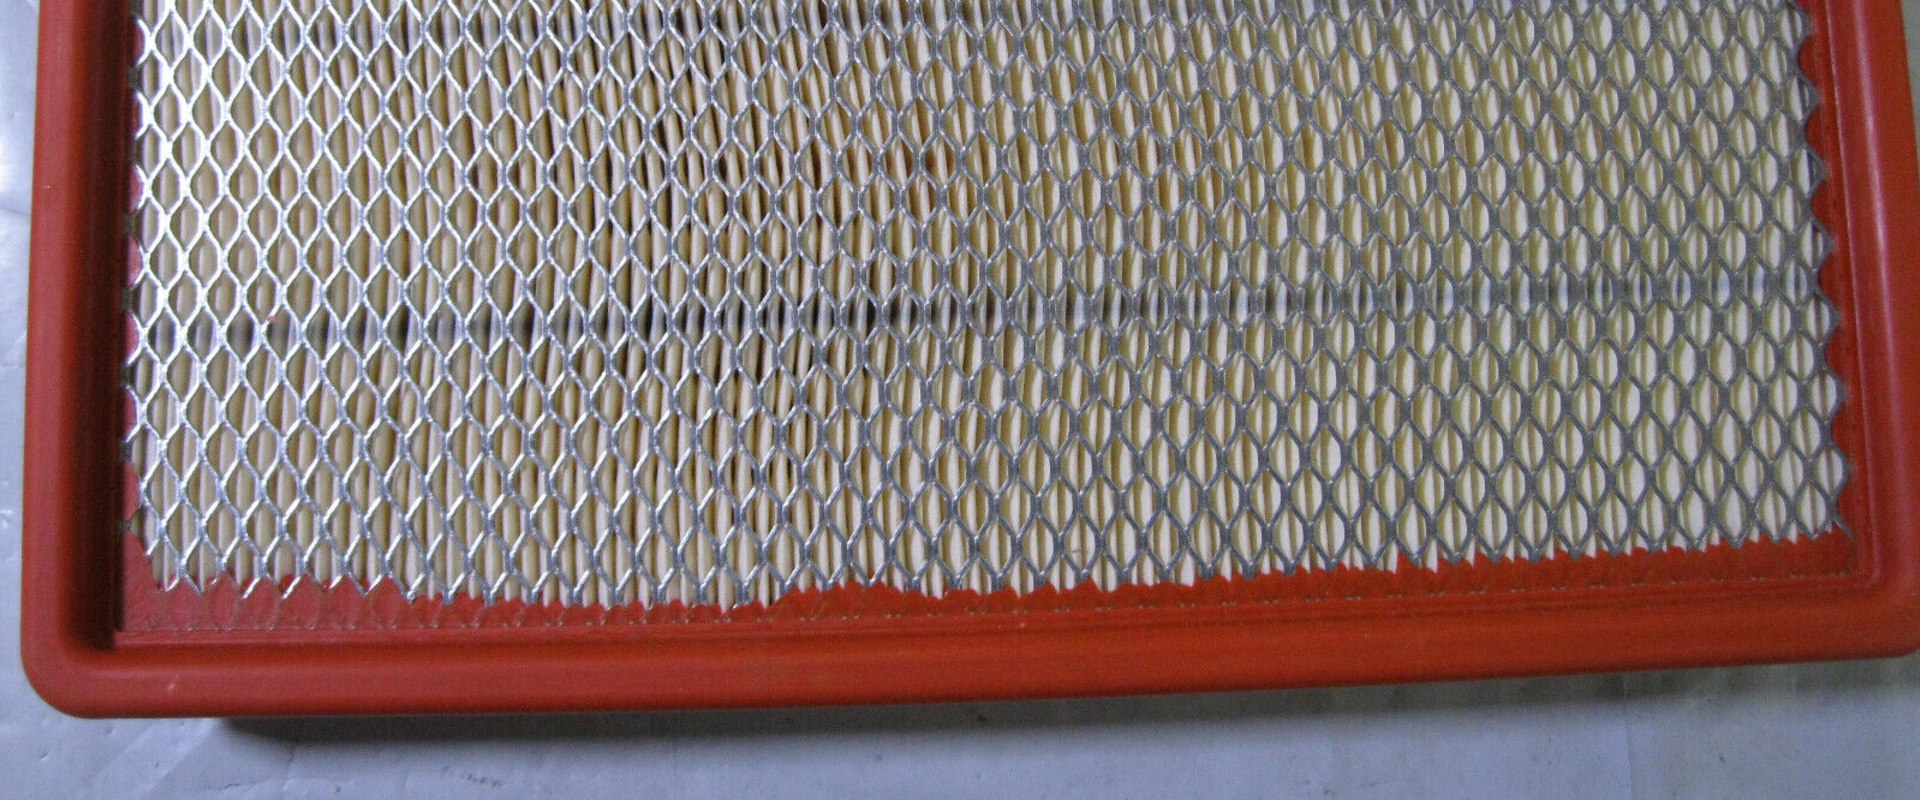 Can I Use HSA to Buy an Air Filter?